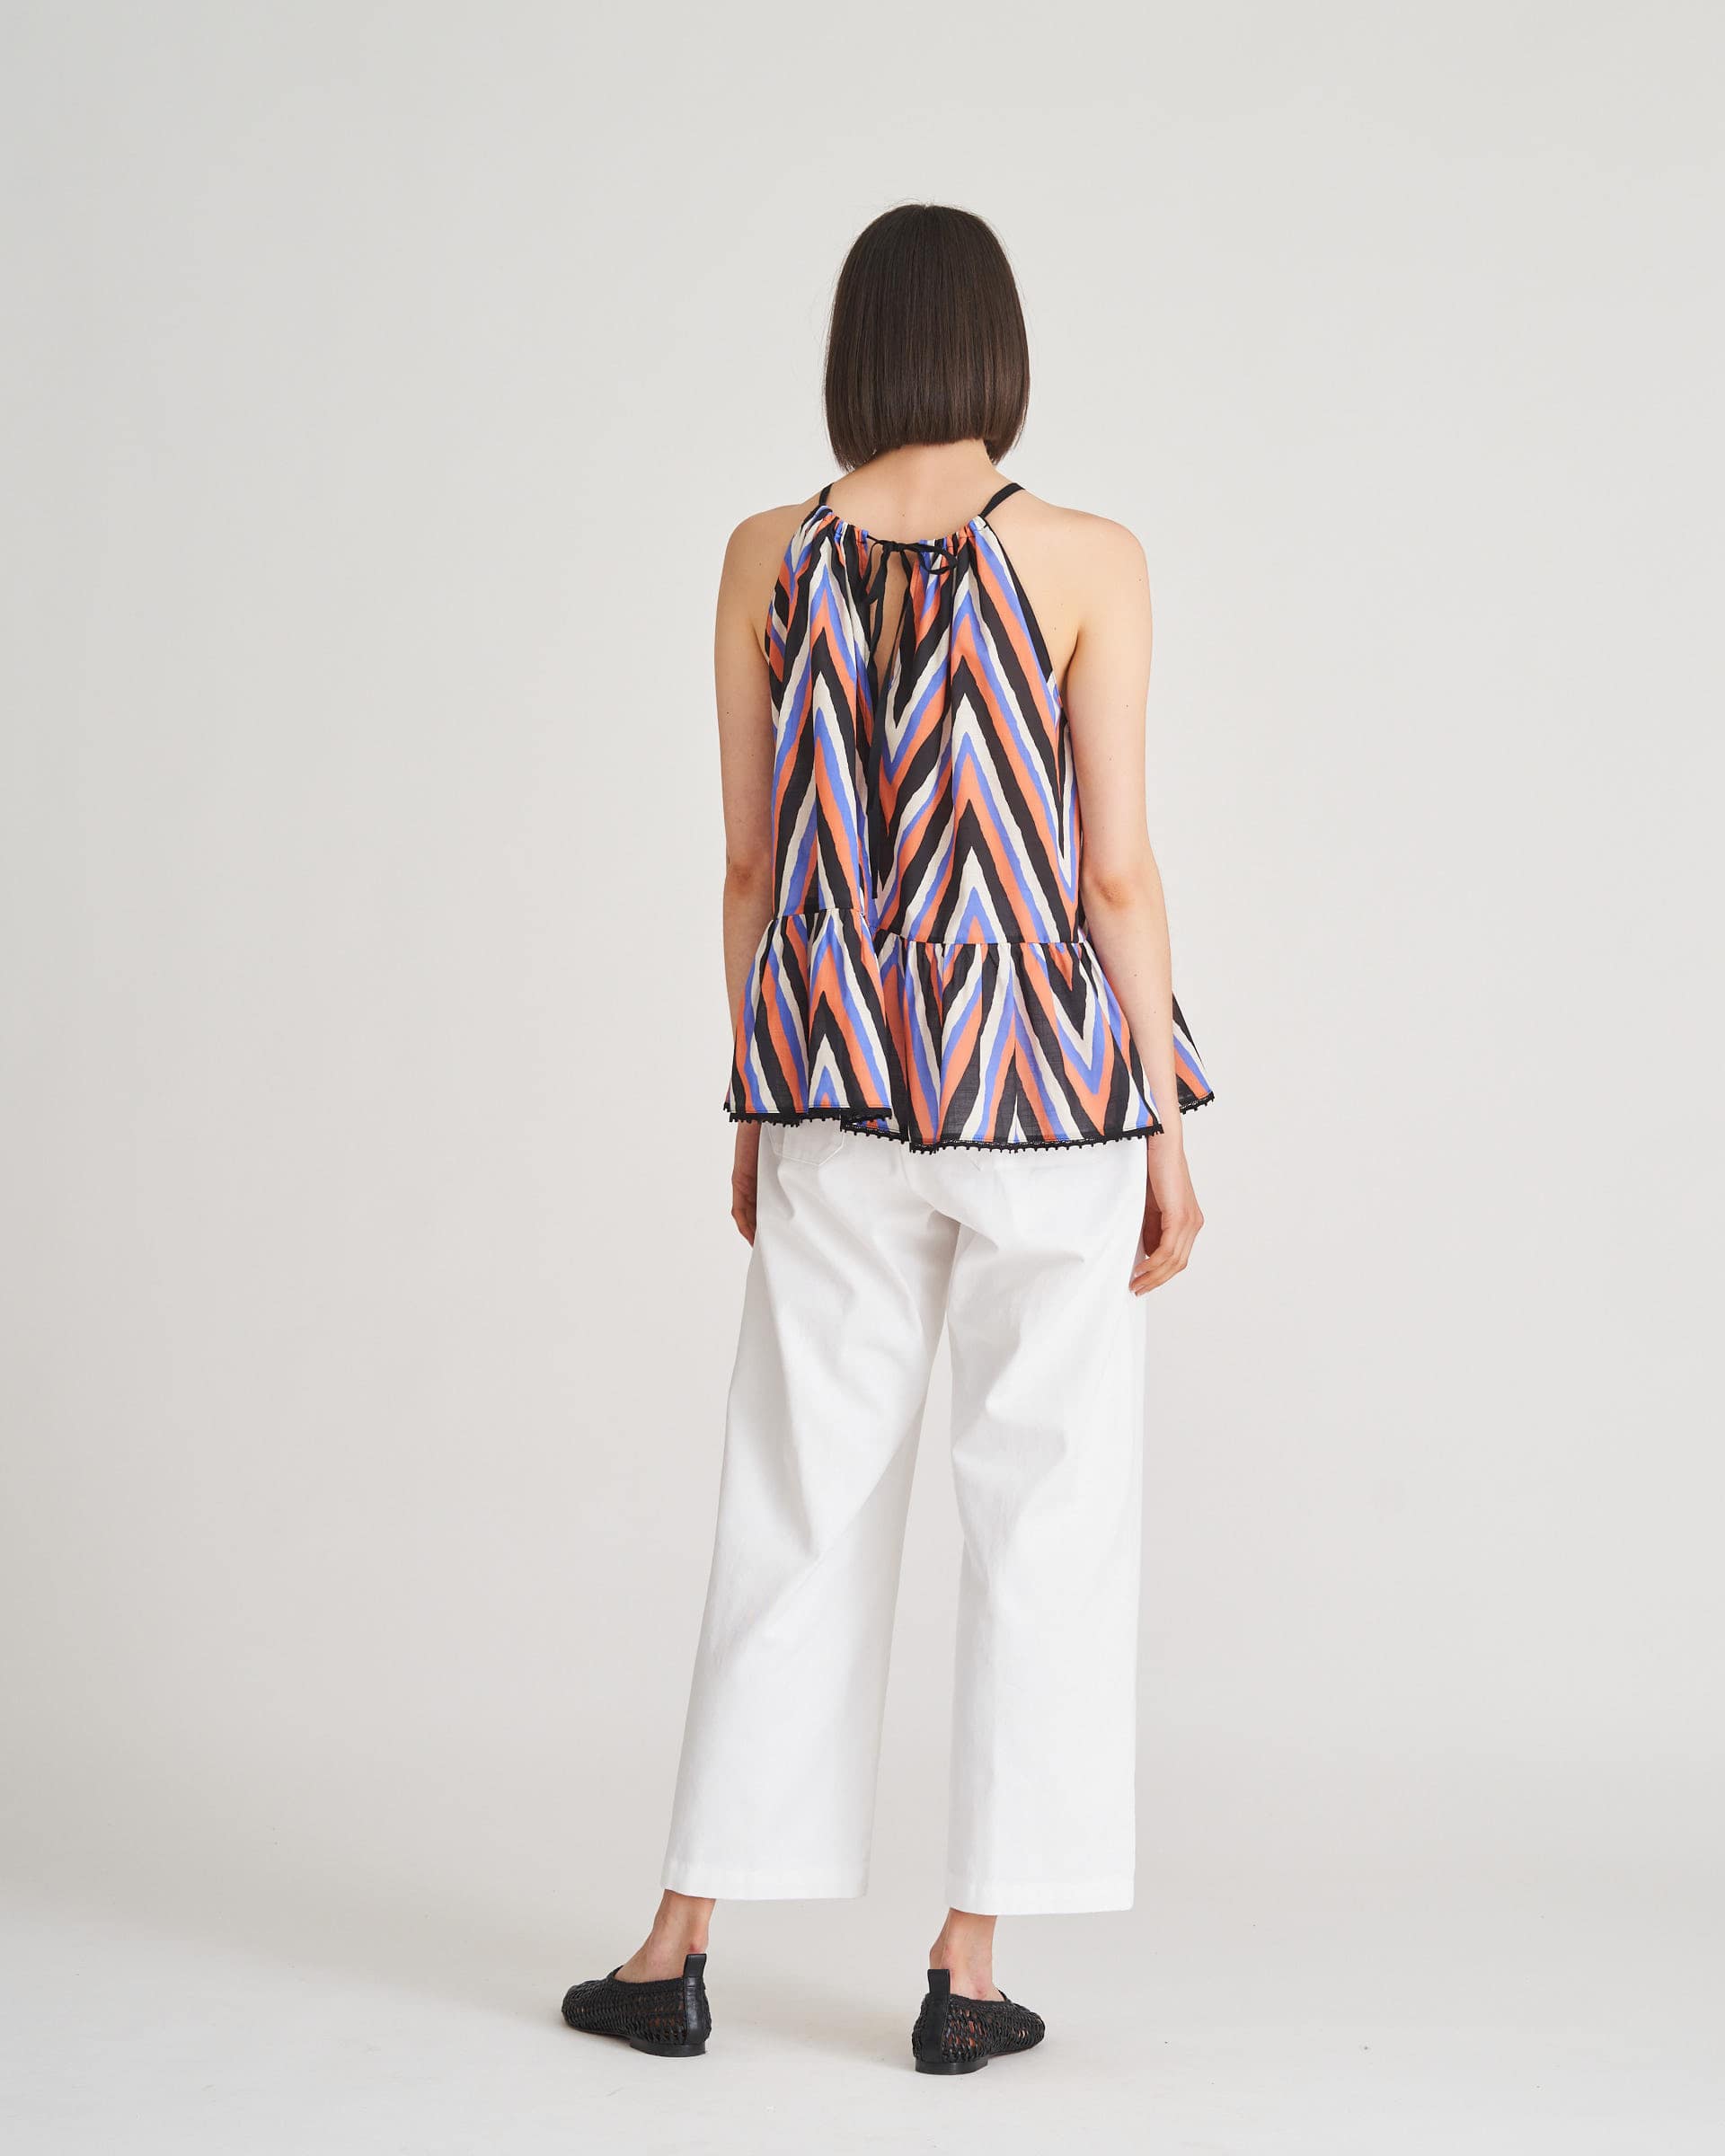 The Market Store | Patterned Sleeveless Top